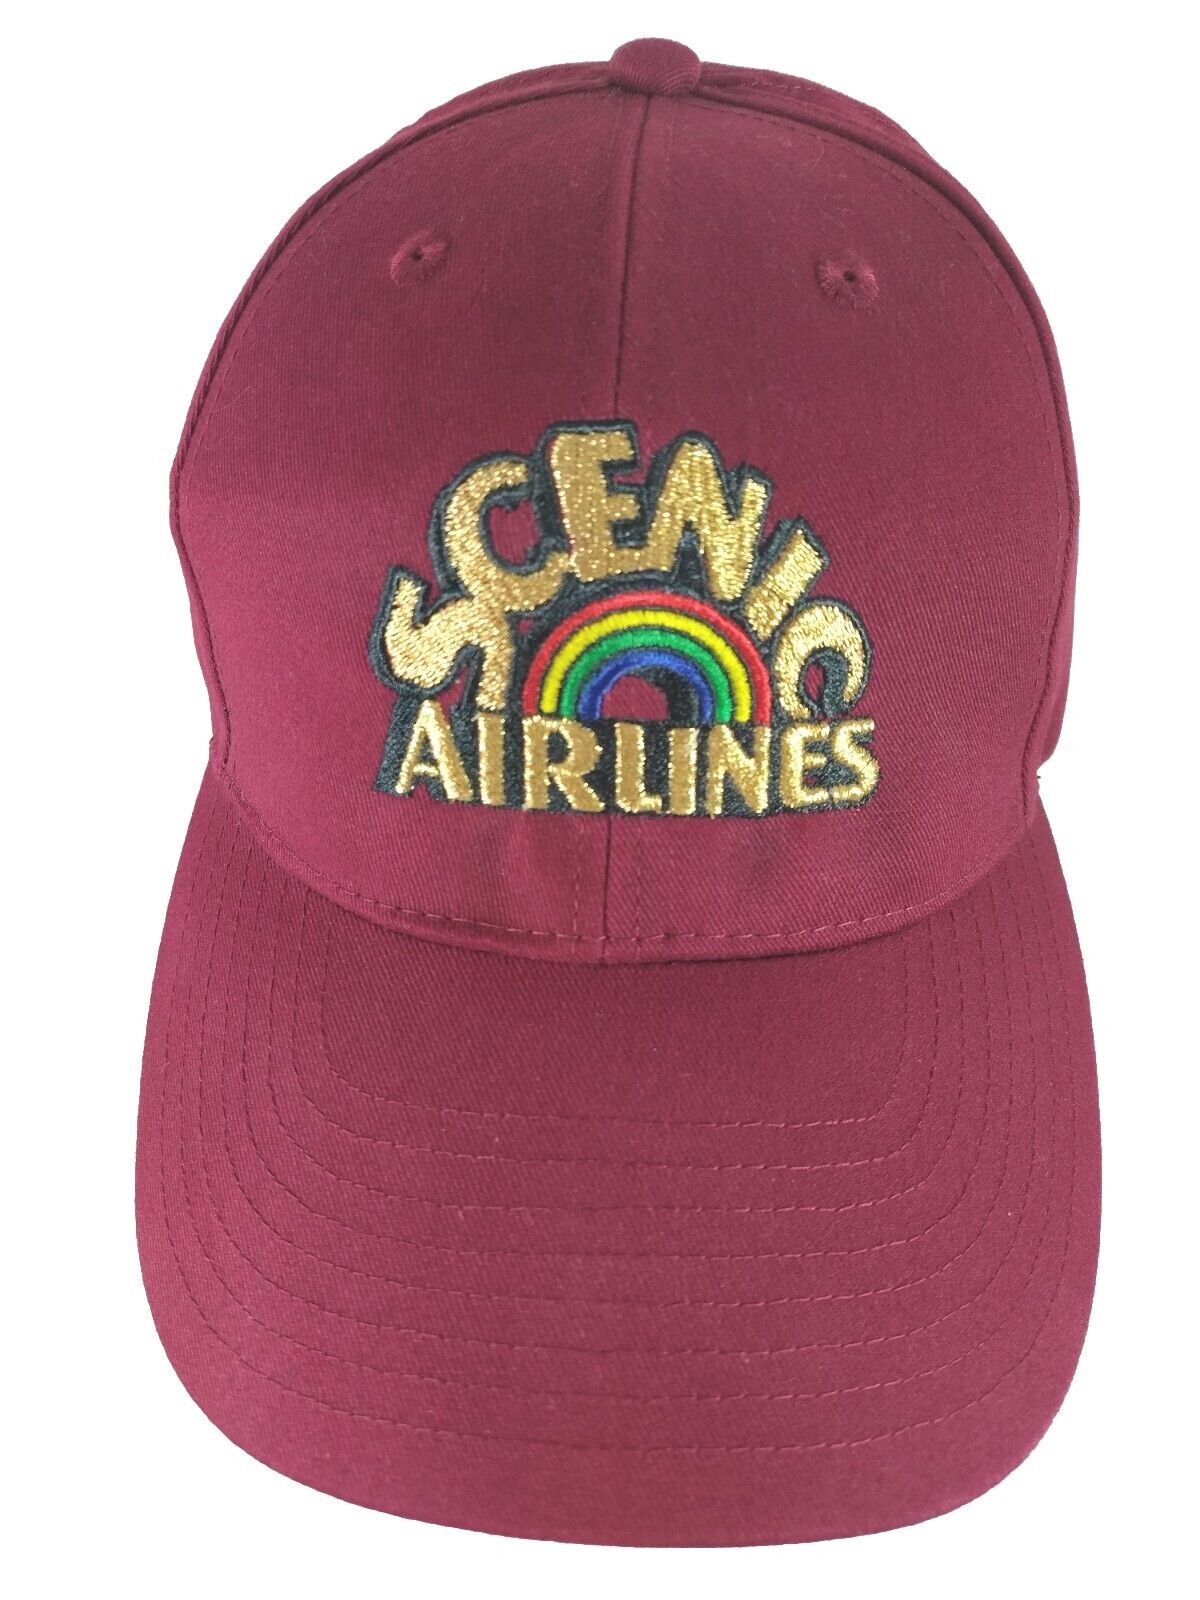 Scenic Airlines Hat Cap Red Burgundy Grand Canyon Tour Company USA Vintage